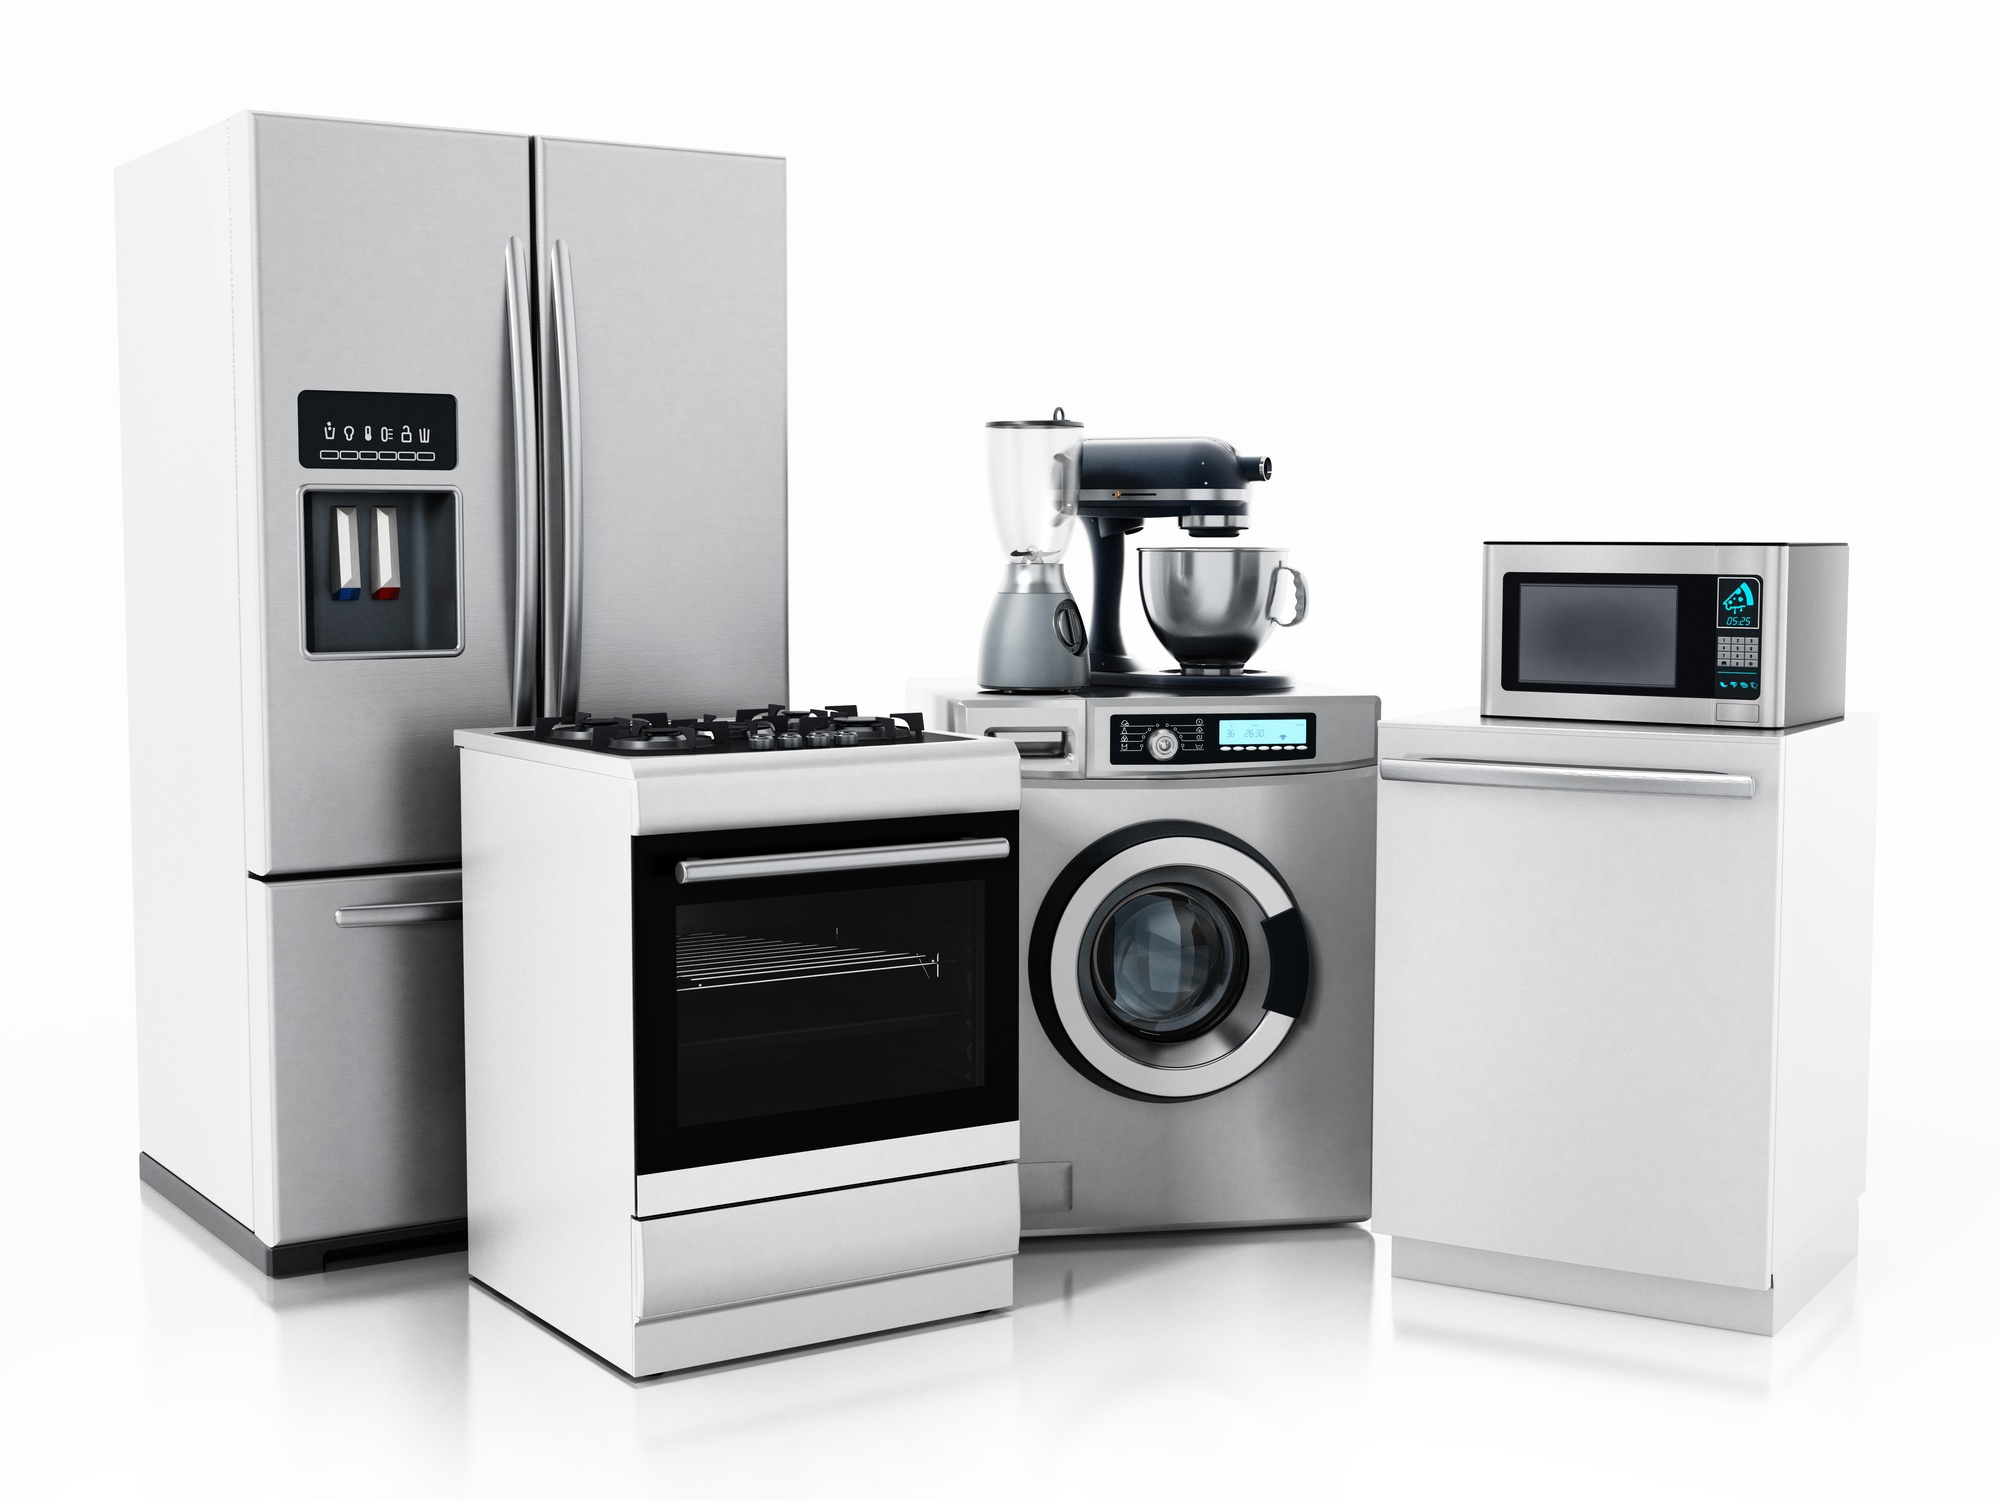 10 Must Have Kitchen Appliances Every Home Needs